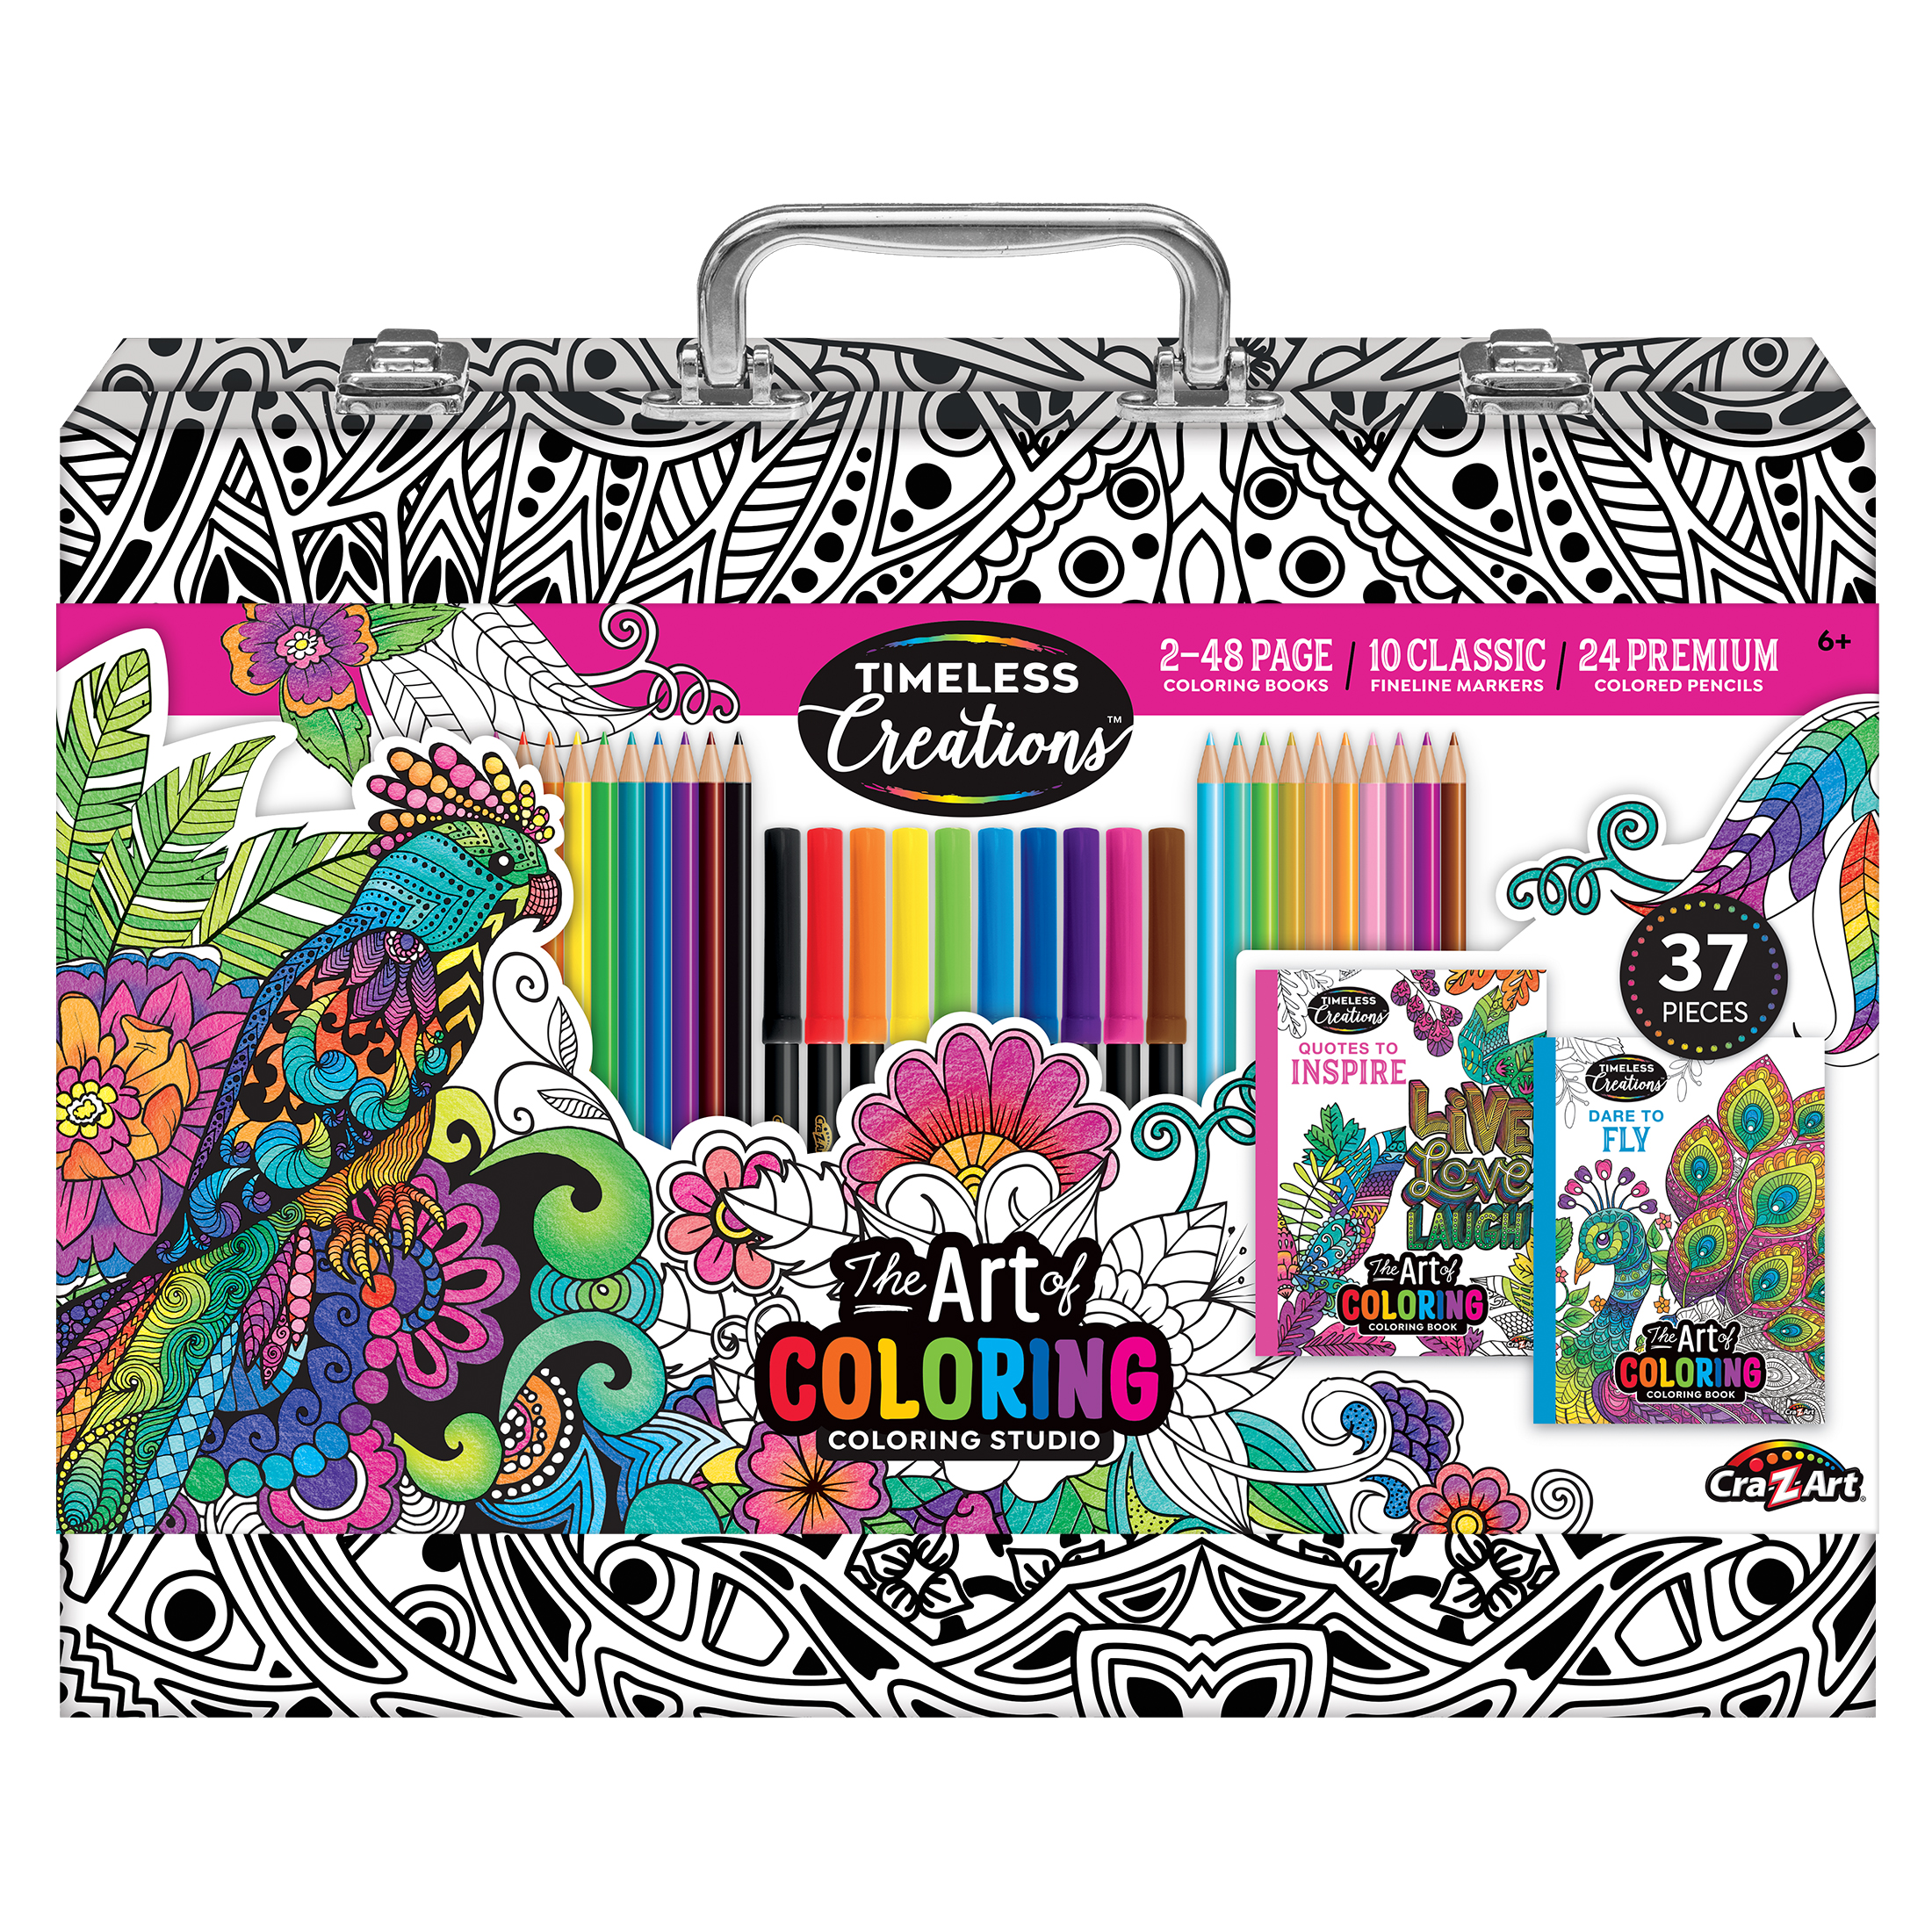 Cra-Z-Art Timeless Creations Multicolor Adult Coloring Drawing Set, Beginner to Expert - image 1 of 9